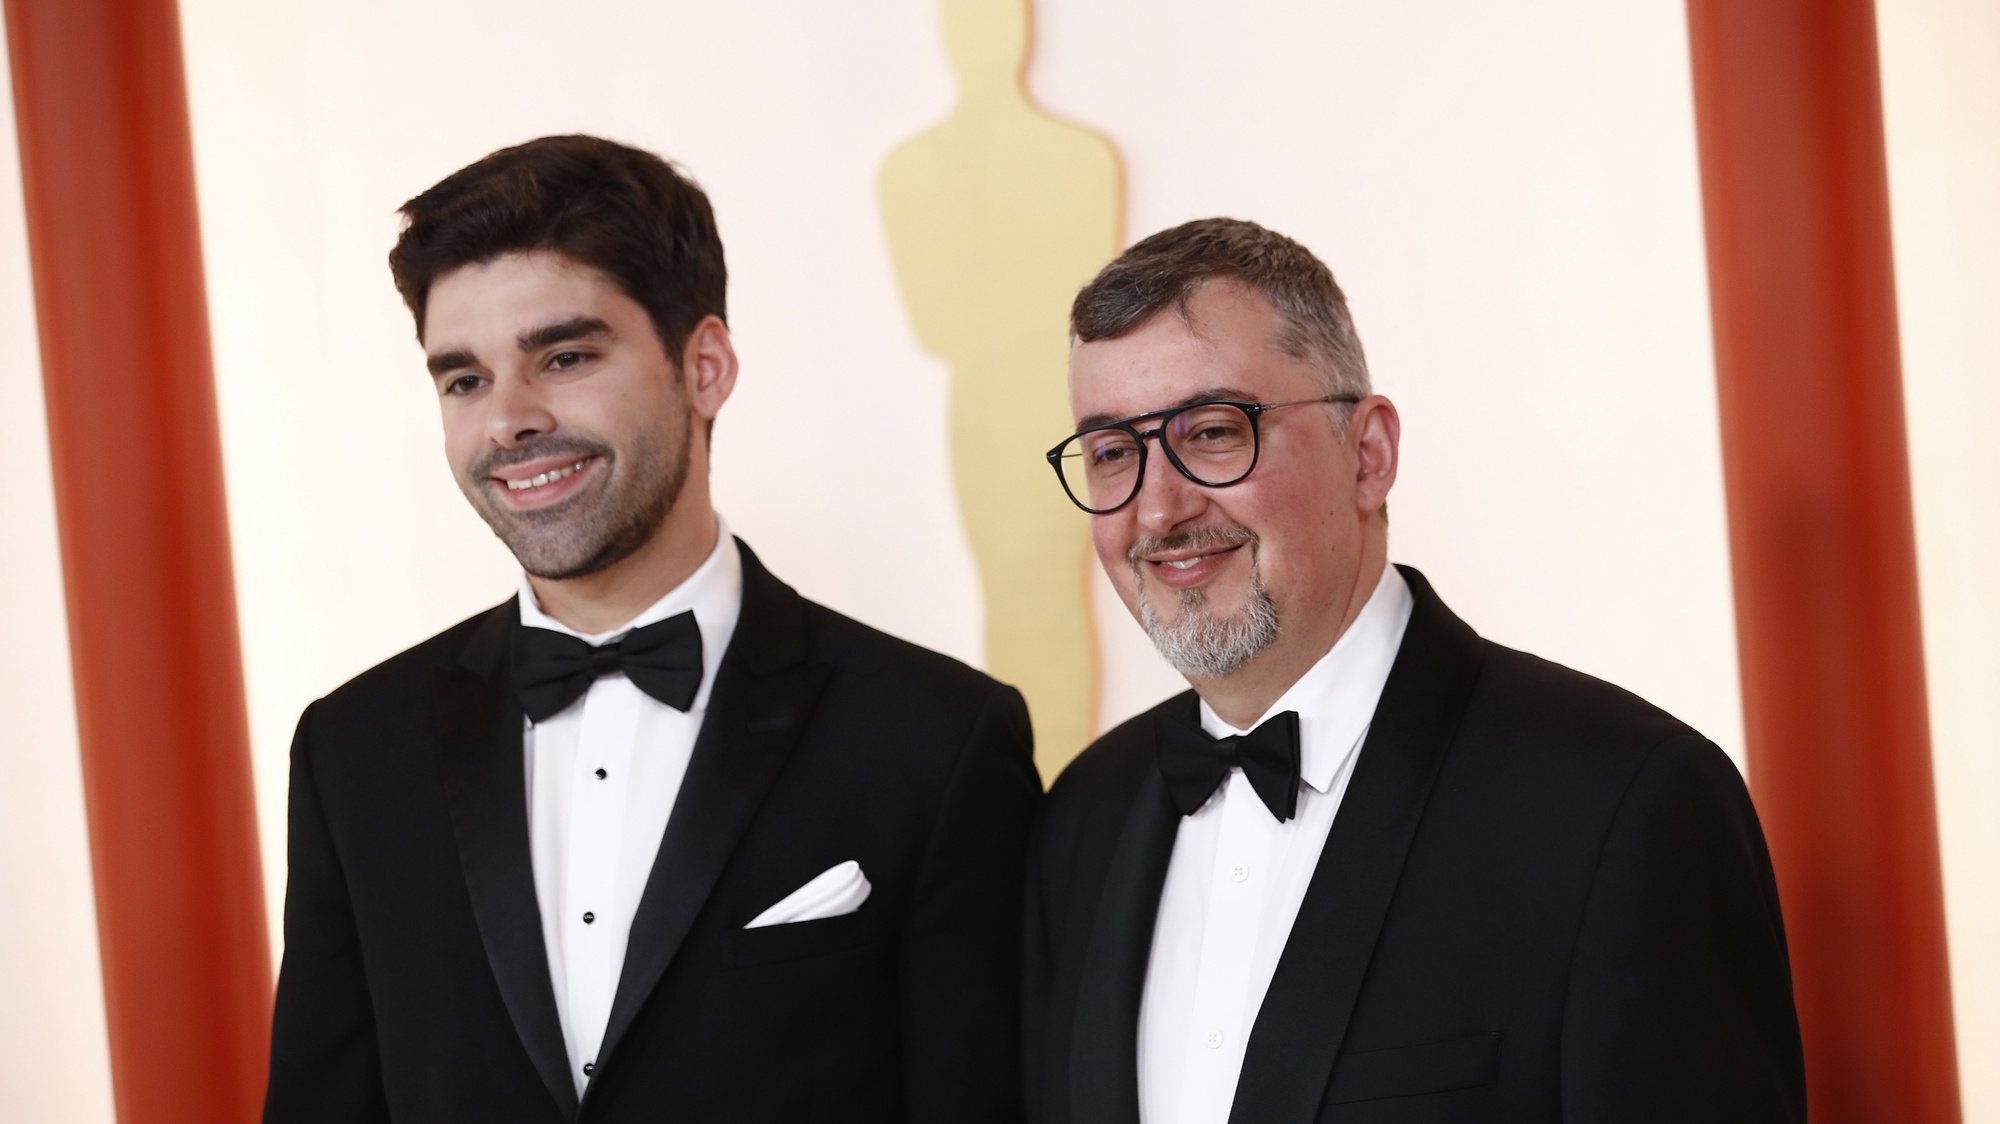 epa10517751 (L-R) Joao Gonzalez and Bruno Caetano arrive for the 95th annual Academy Awards ceremony at the Dolby Theatre in Hollywood, Los Angeles, California, USA, 12 March 2023. The Oscars are presented for outstanding individual or collective efforts in filmmaking in 24 categories.  EPA/CAROLINE BREHMAN